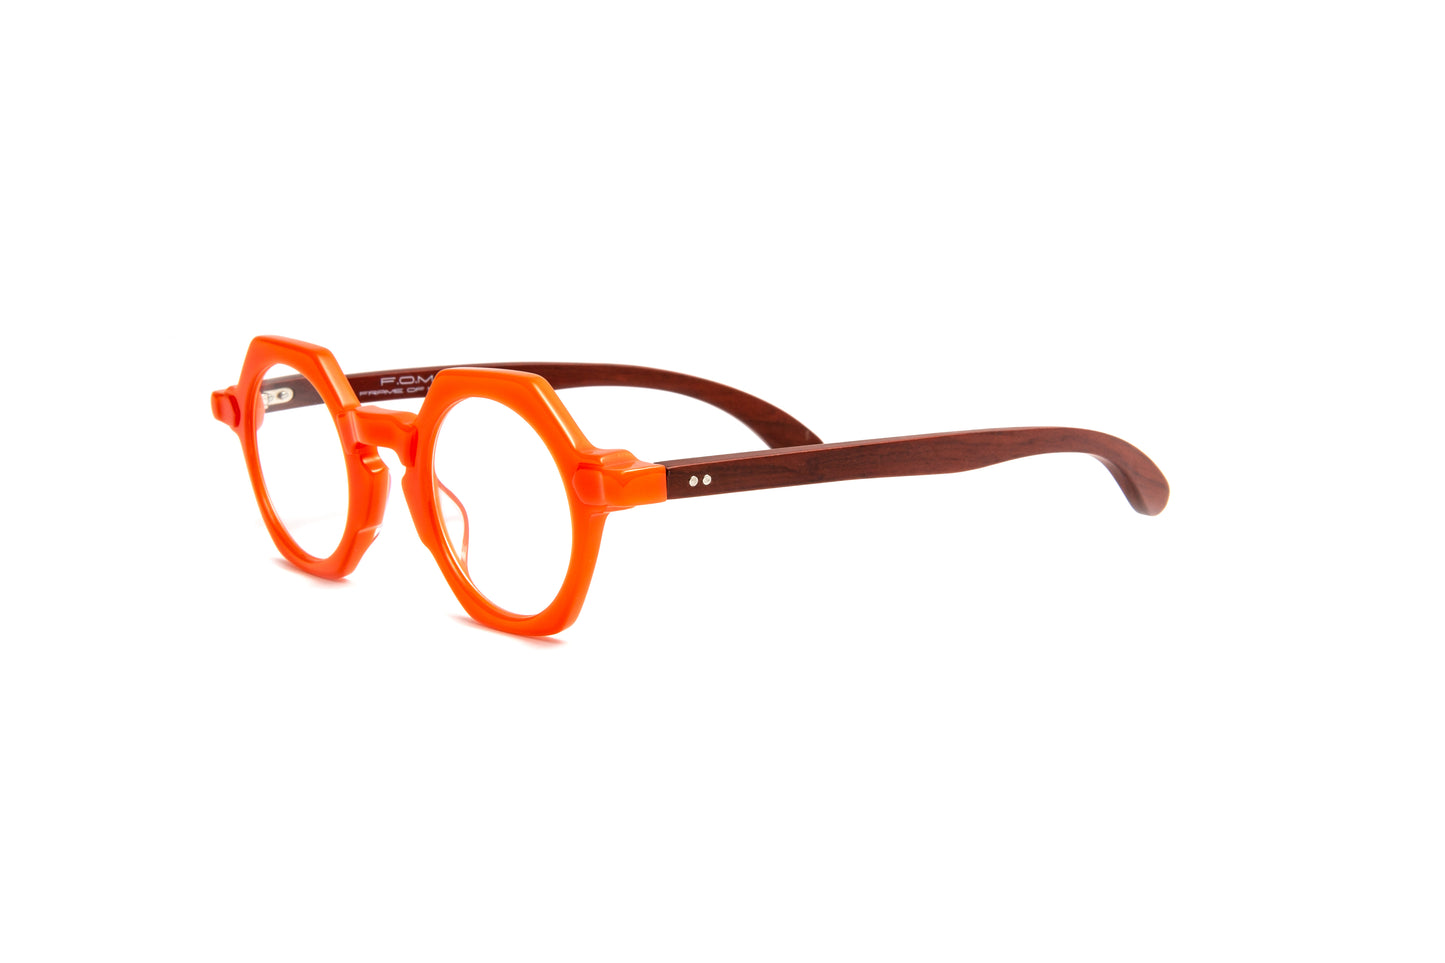 Round orange pantos reading glasses with cherry wood temples for men and women, designer luxury readers, chic reading glasses